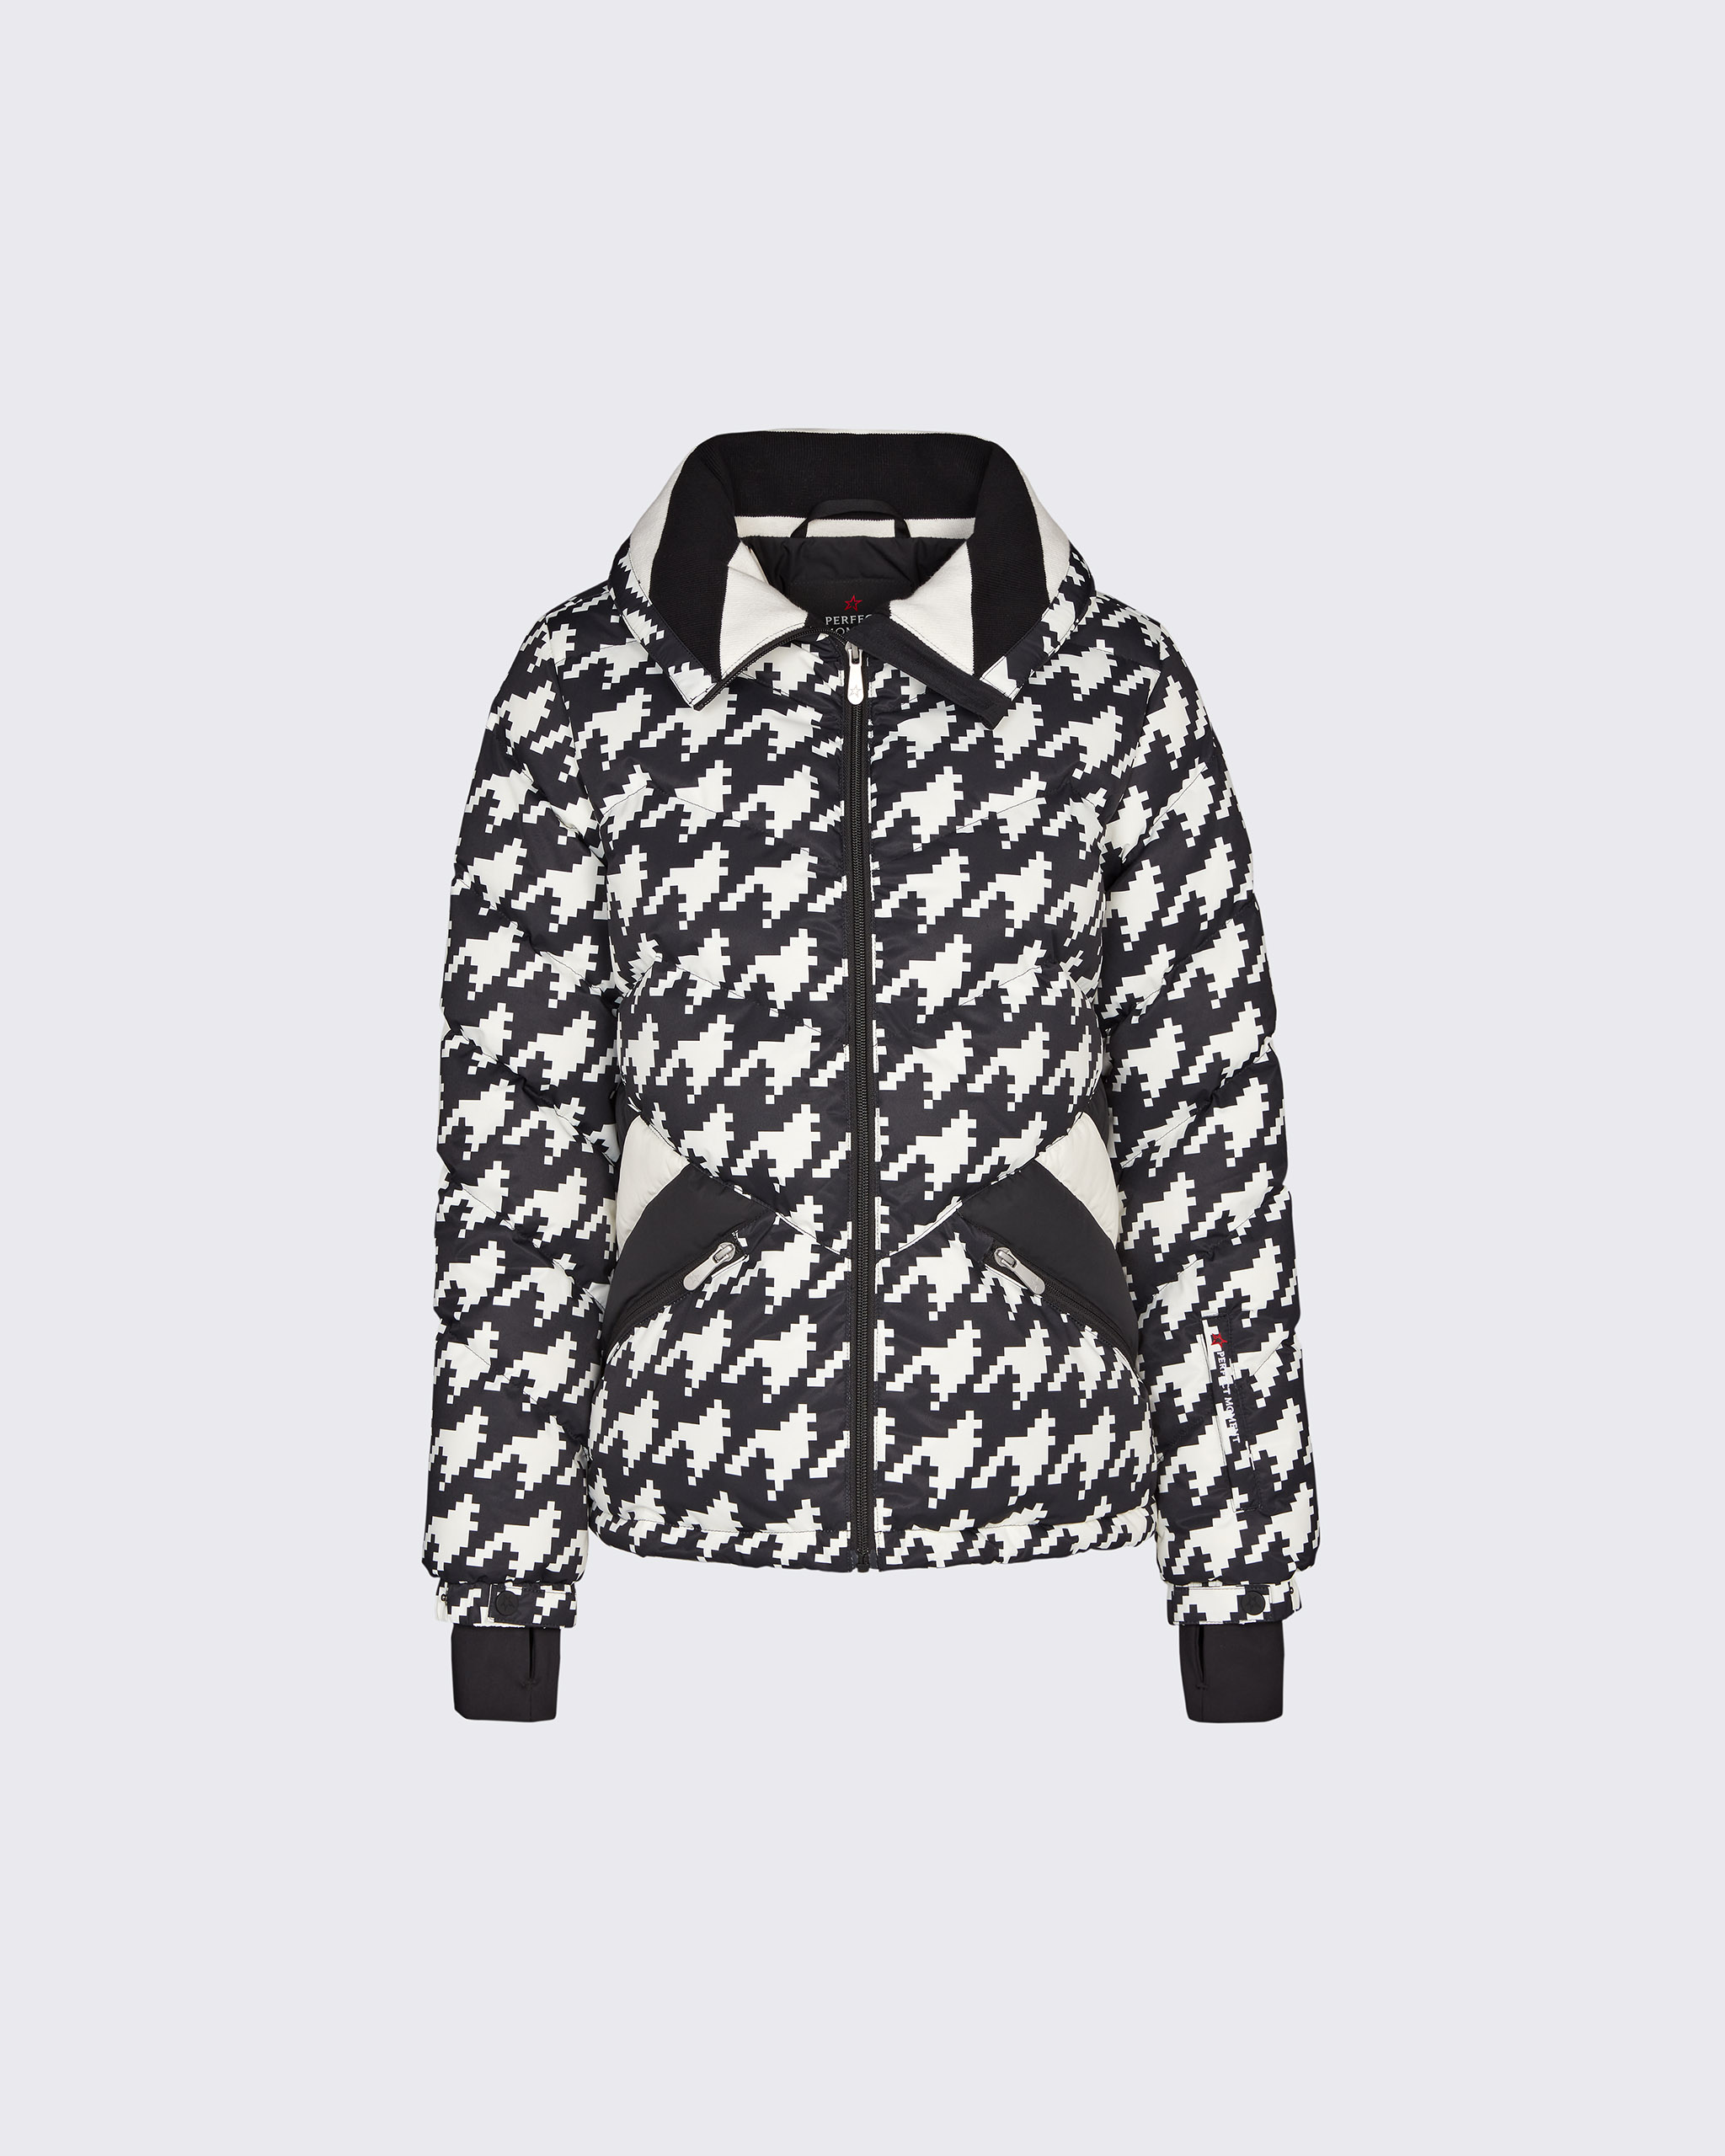 Perfect Moment Houndstooth Ski Duvet Down Jacket M In Houndstooth-black-snow-white